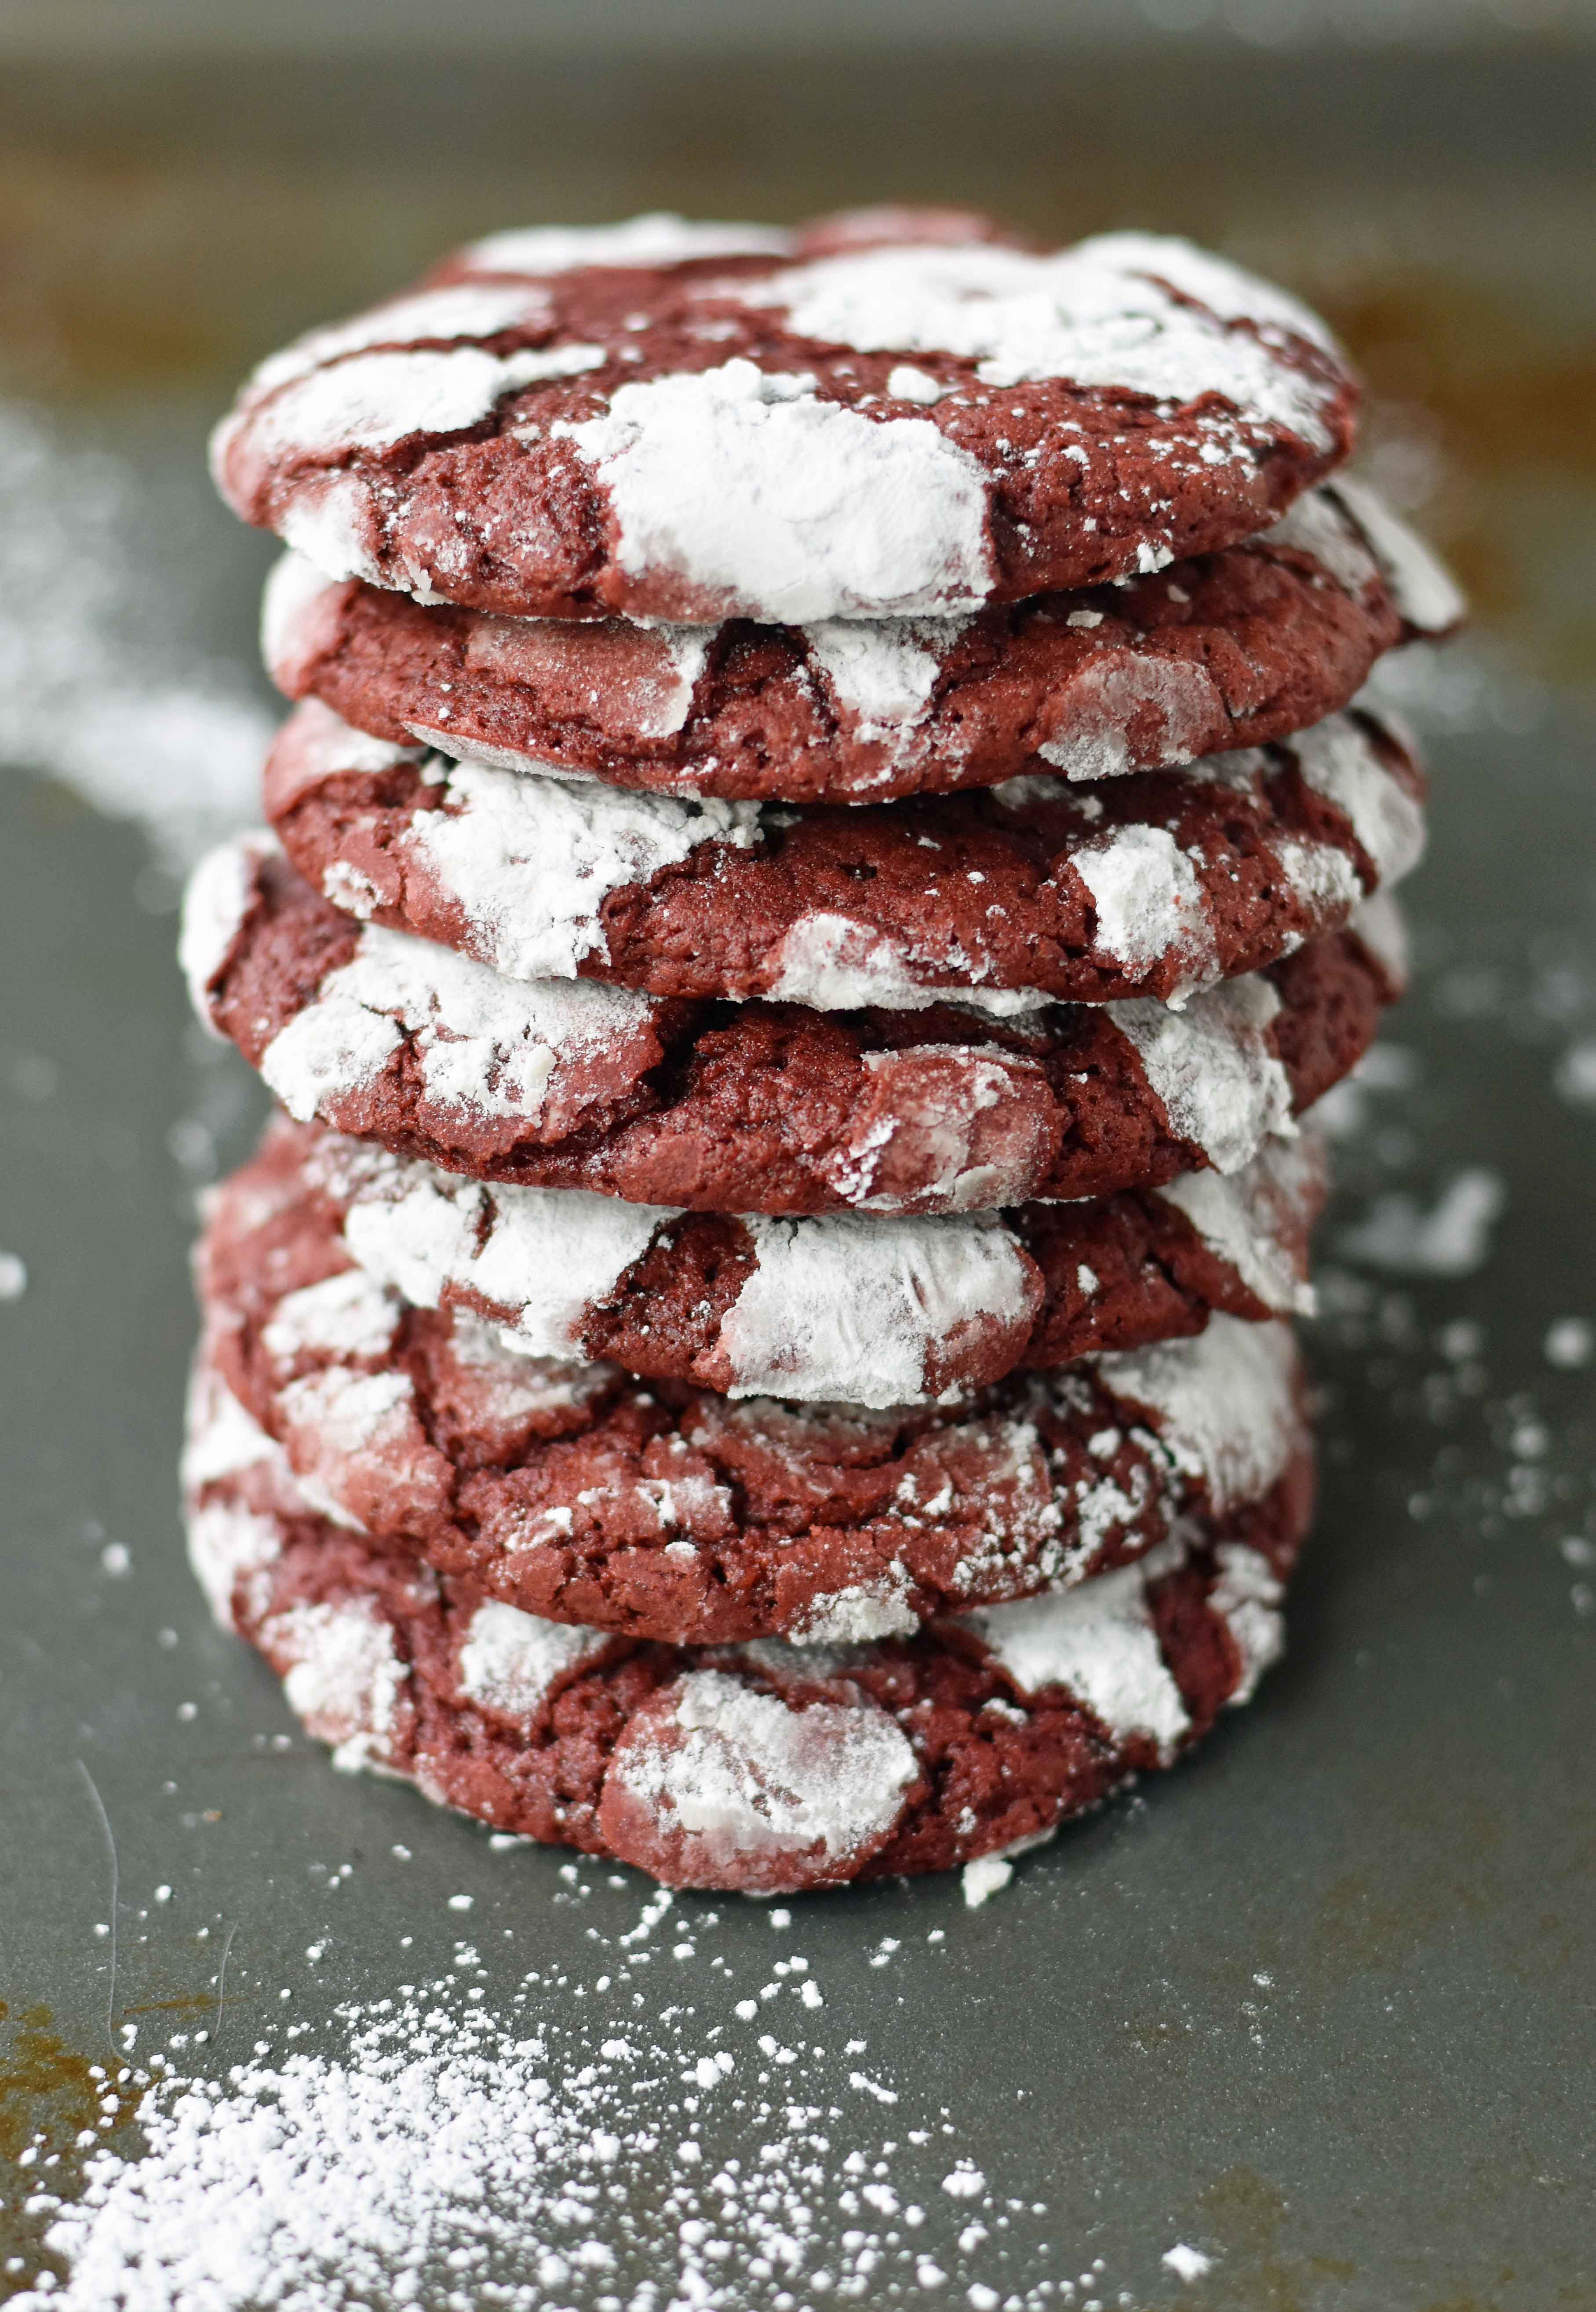 Red Velvet Crinkle Cookies are a mild chocolate soft chewy cookie covered in powdered sugar. A beautifully festive Christmas cookie. www.modernhoney.com